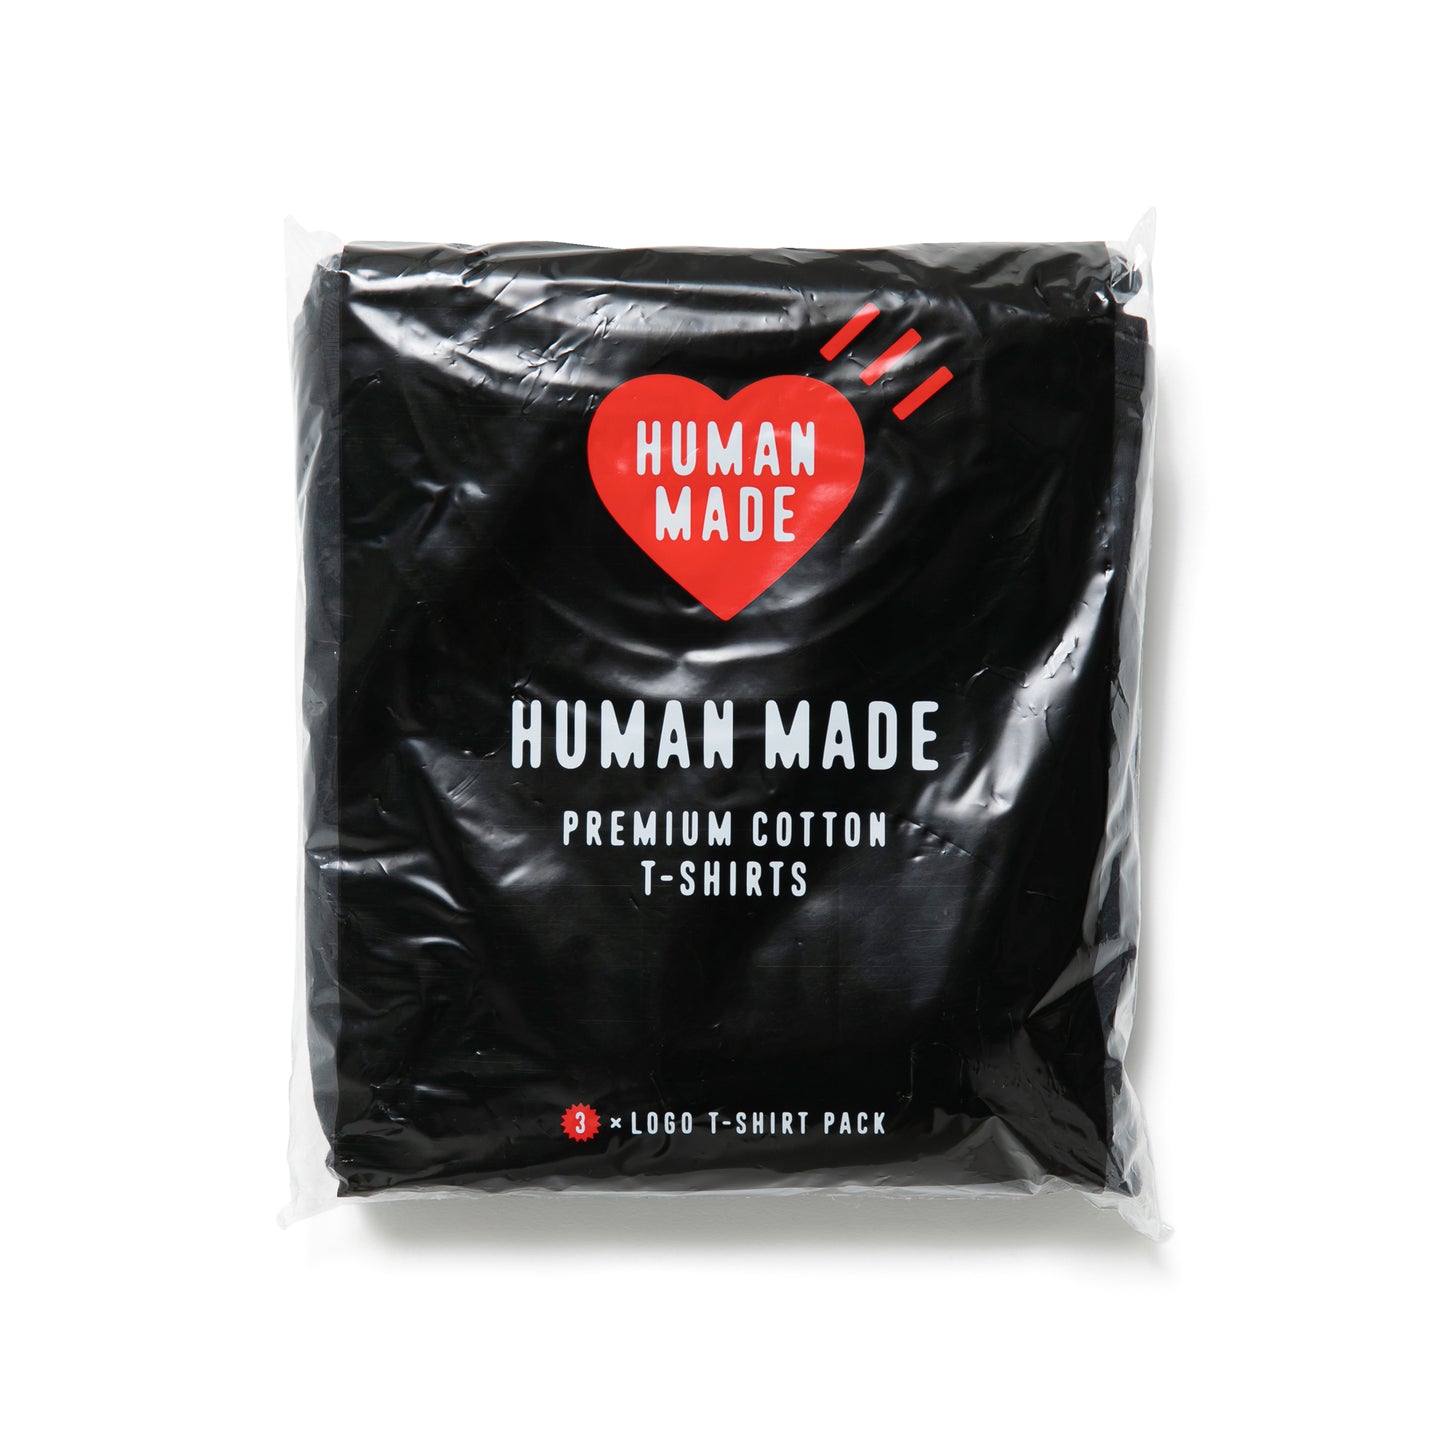 100%COTTONCOLOR限定値引！HUMAN MADE 3×LOGO T-SHIRT PACK